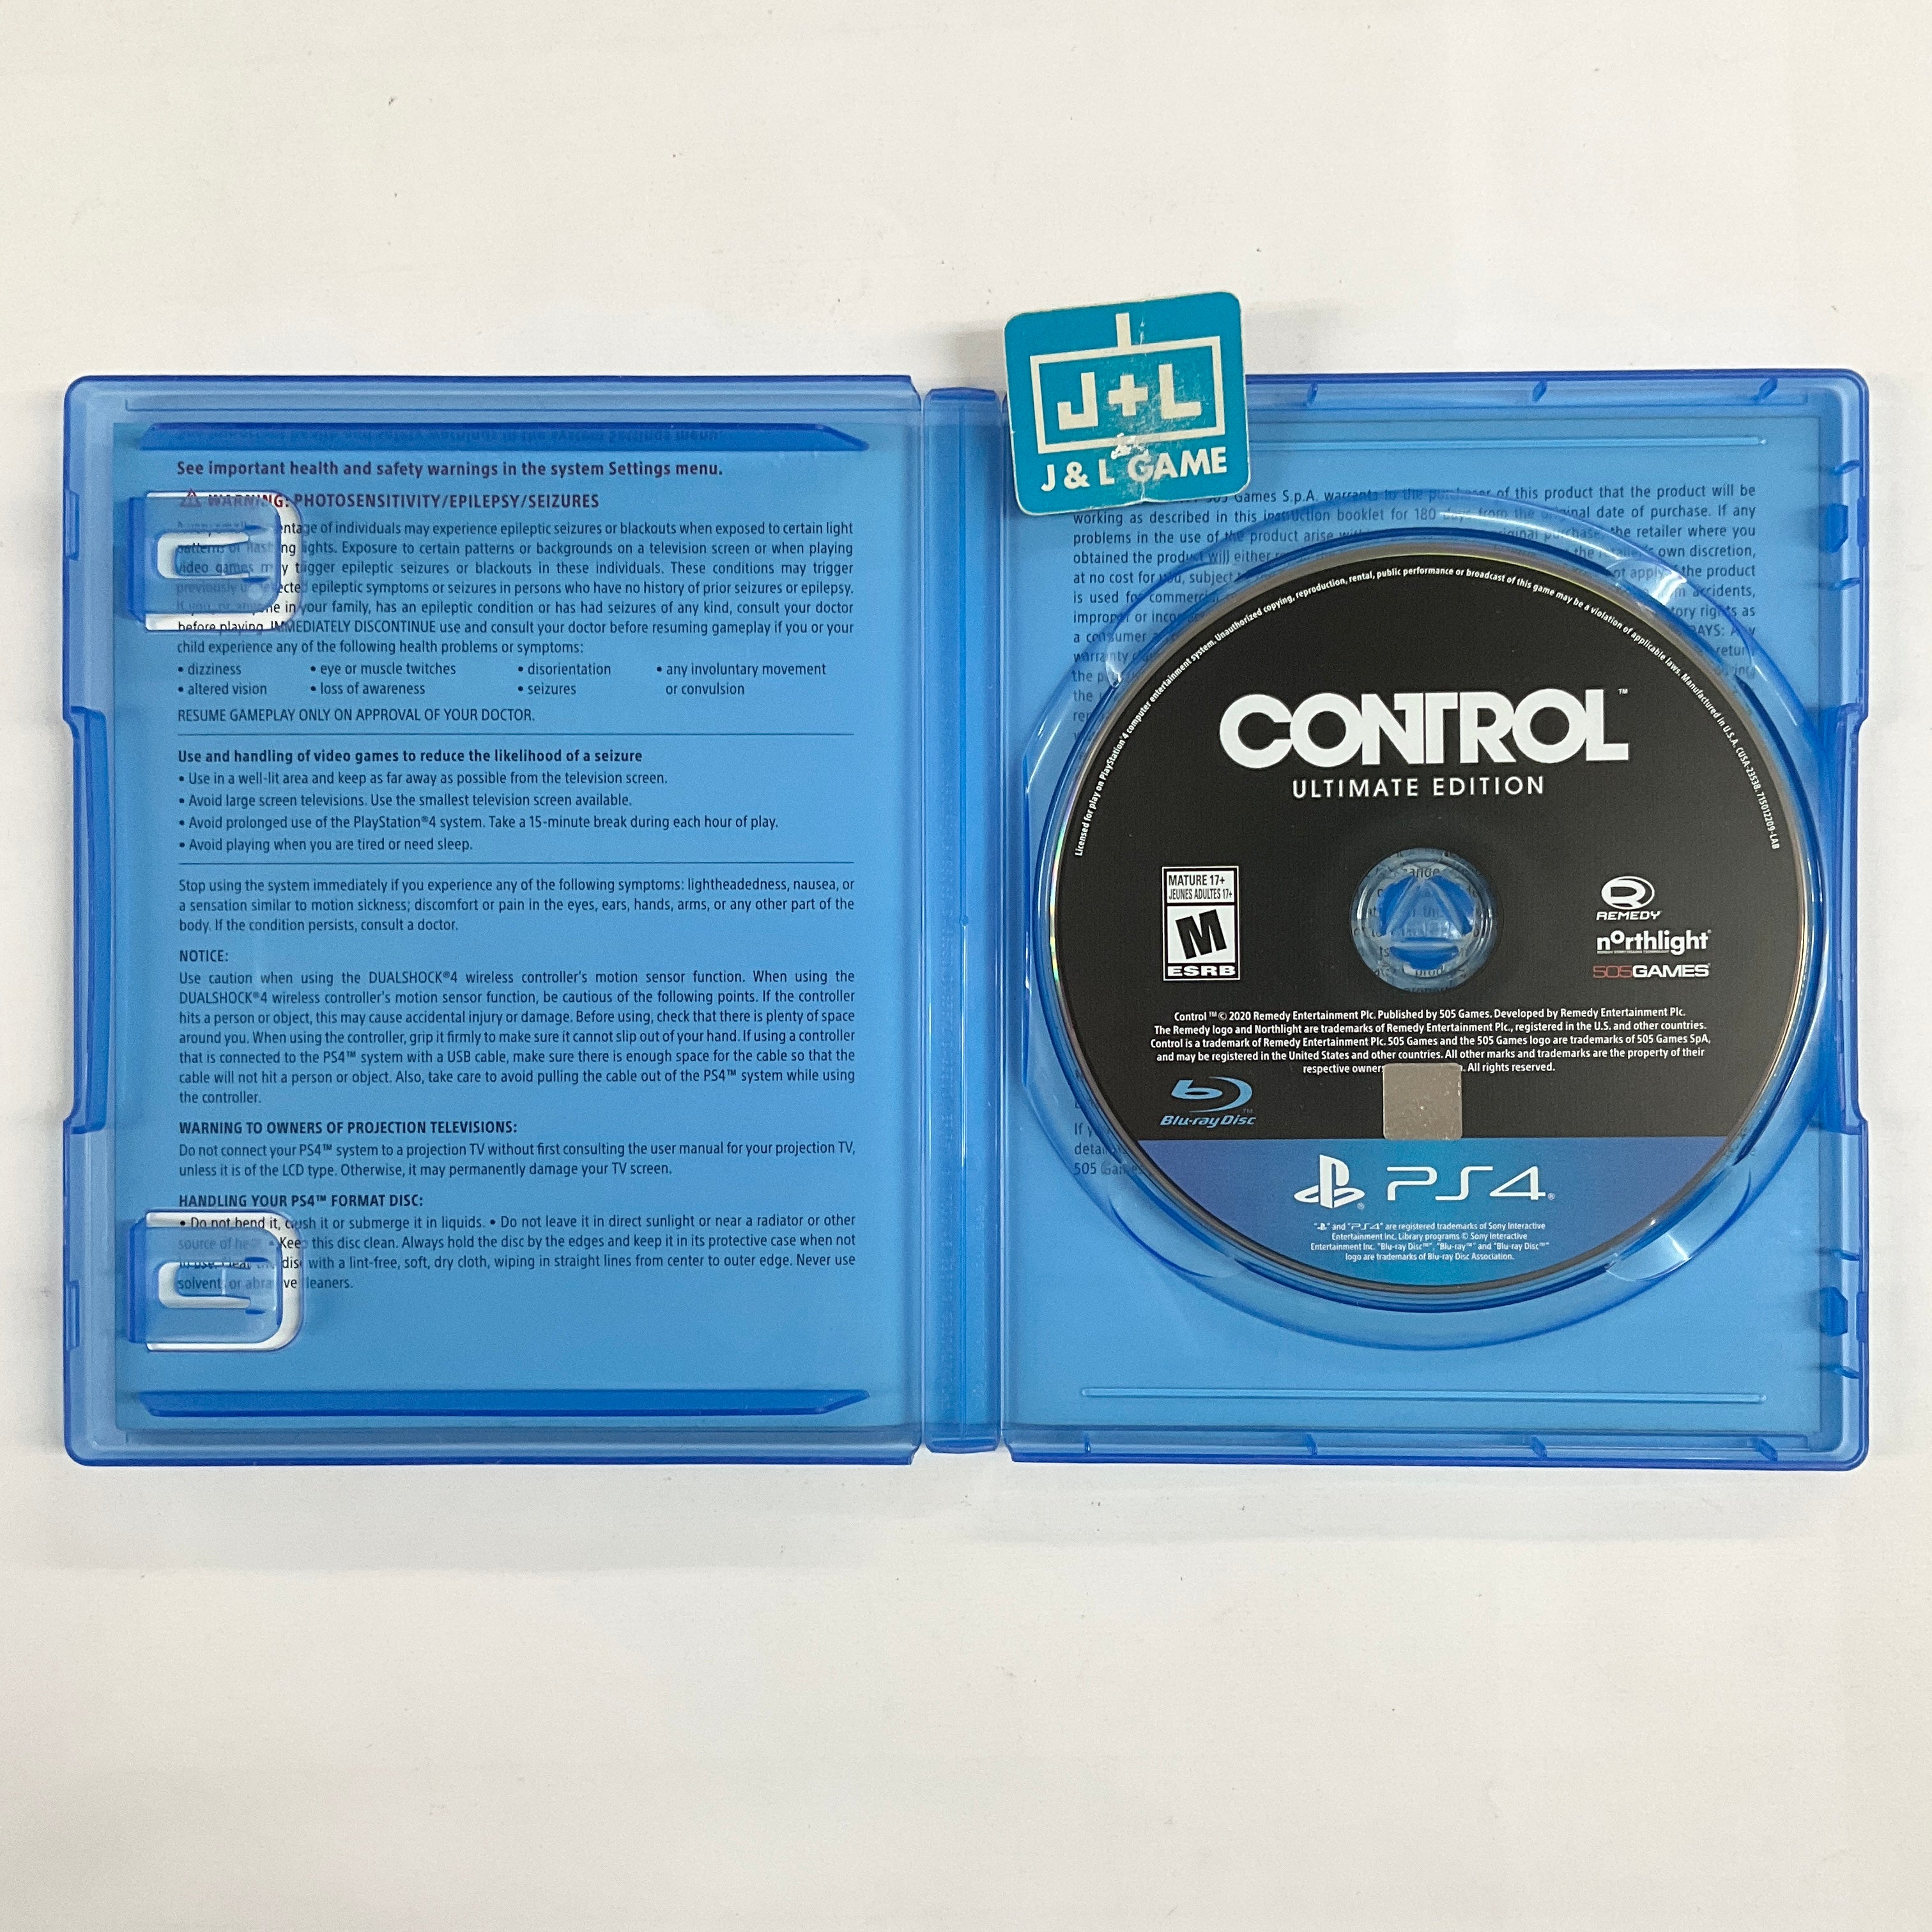 Control Ultimate Edition - (PS4) PlayStation 4 [Pre-Owned] Video Games 505 Games   